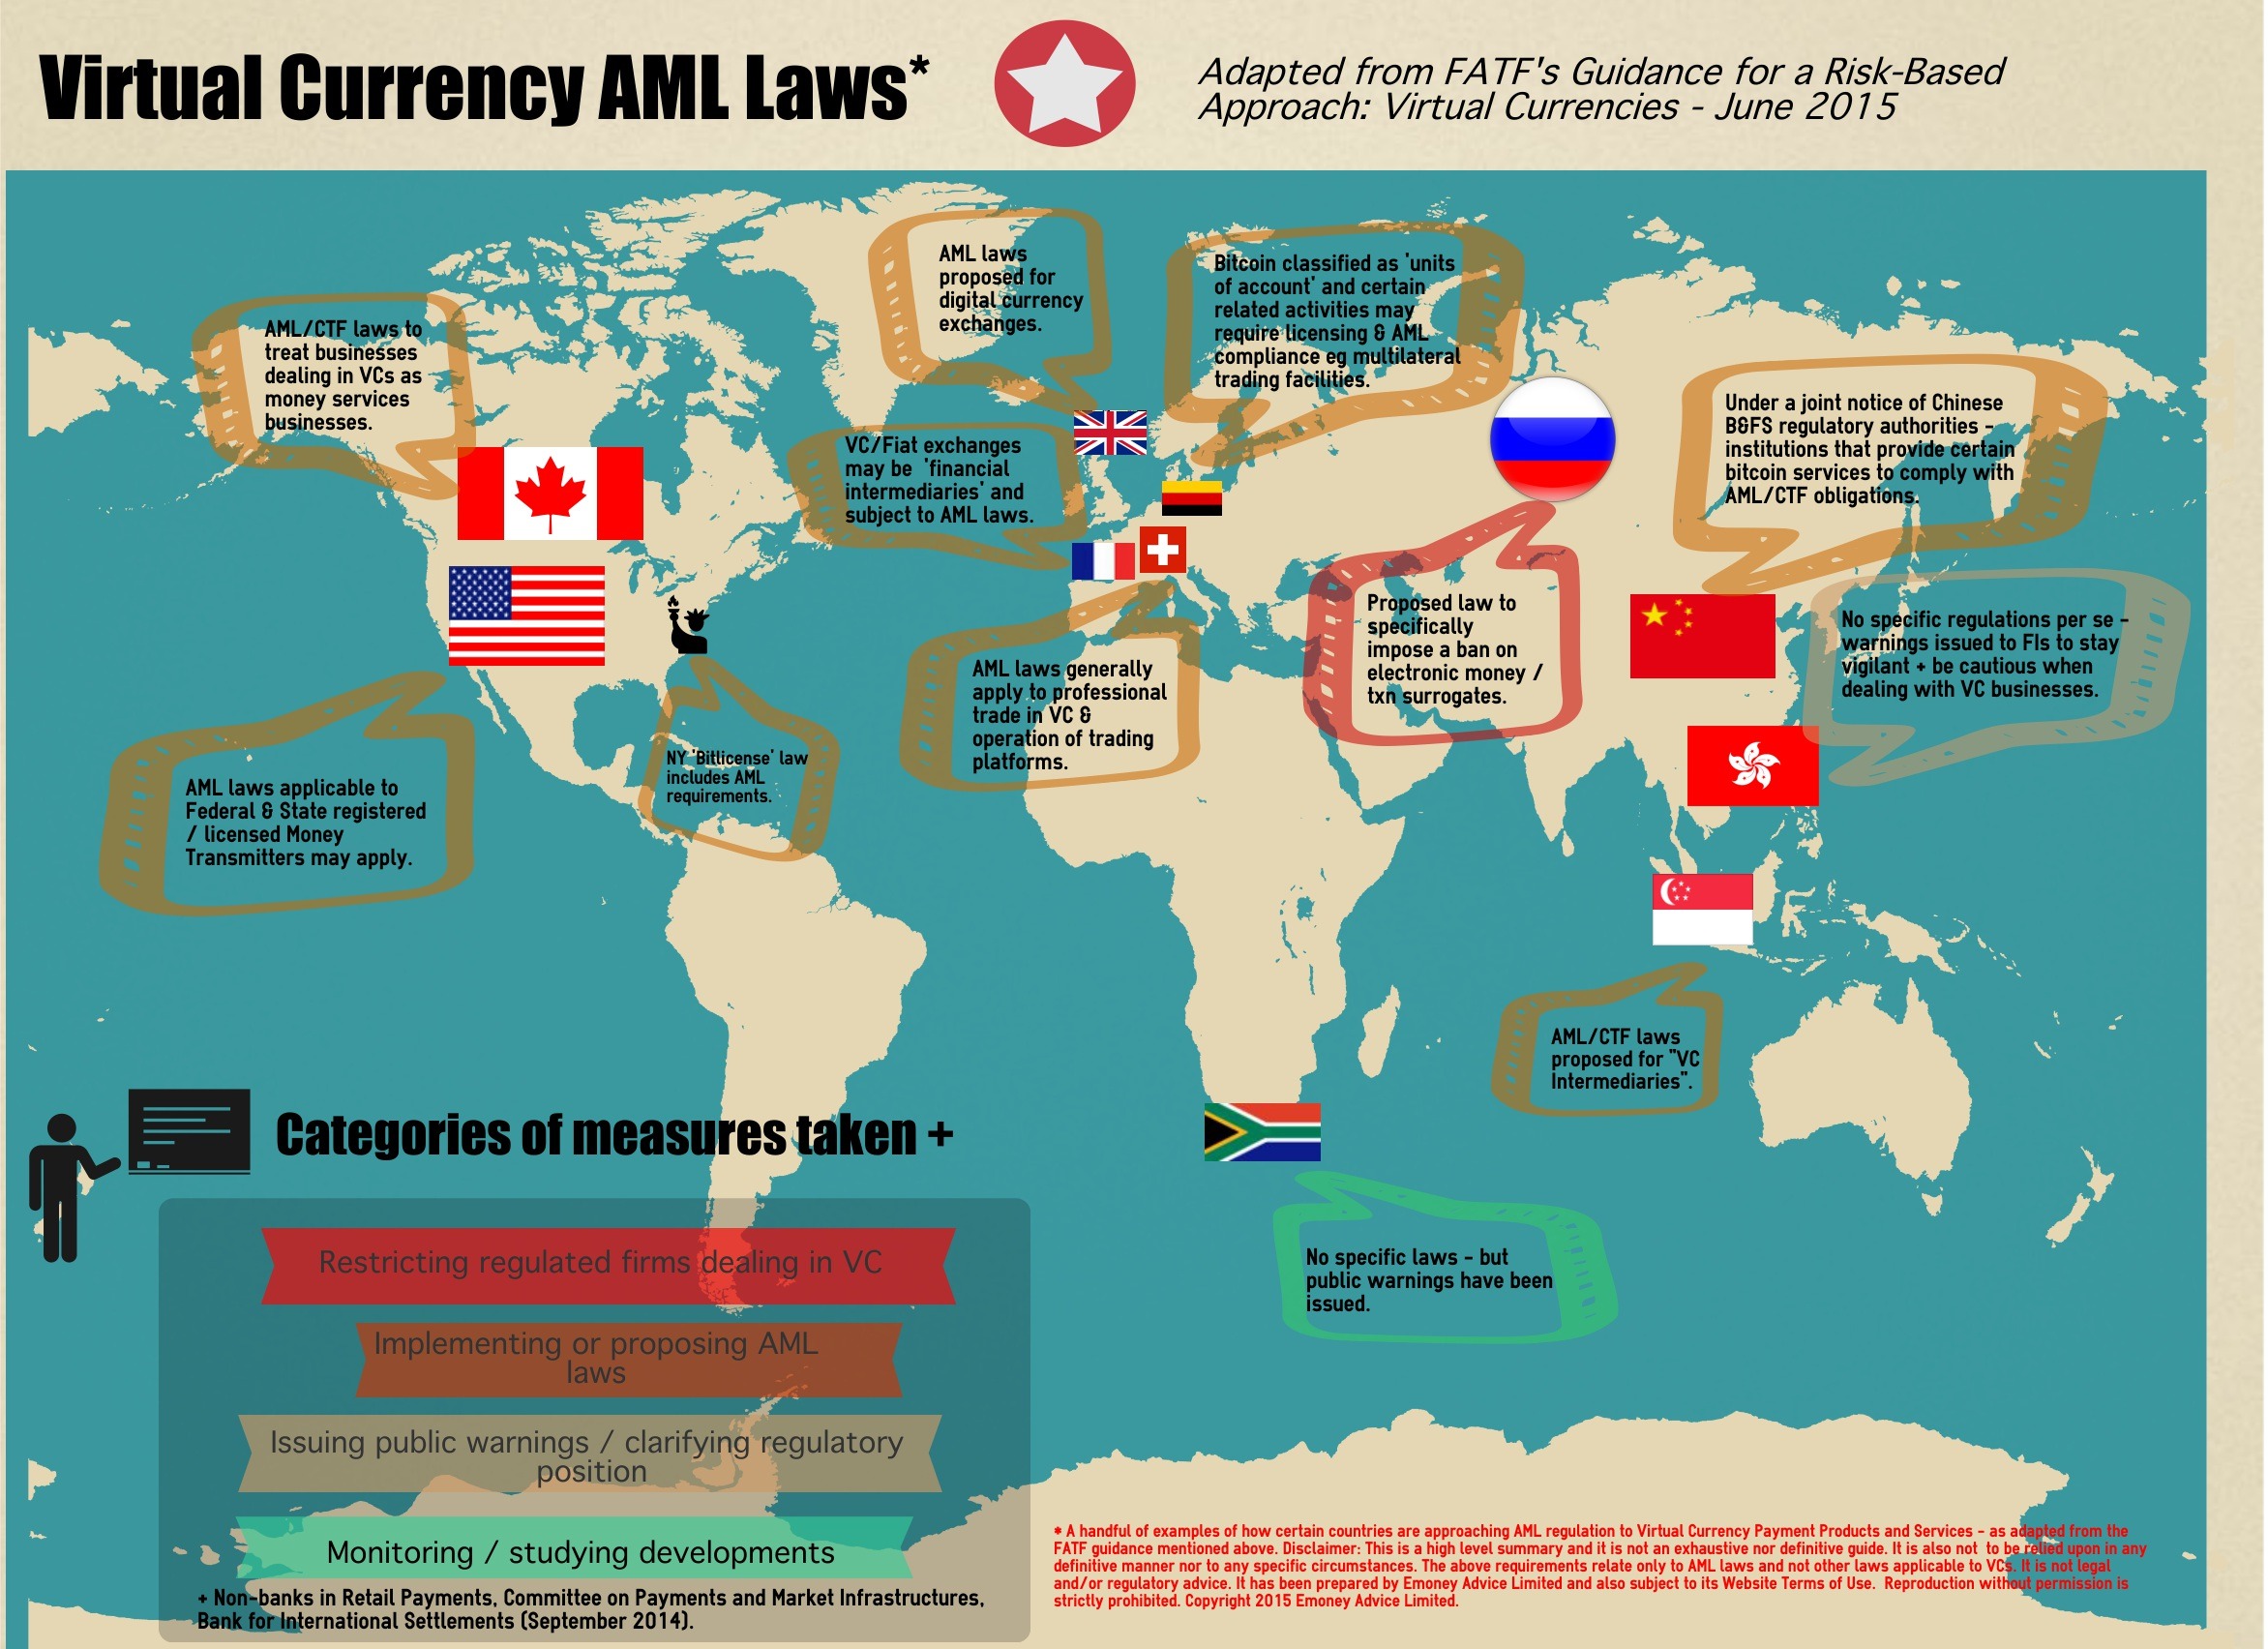 The increasing bitcoin regulation around several countries in the world